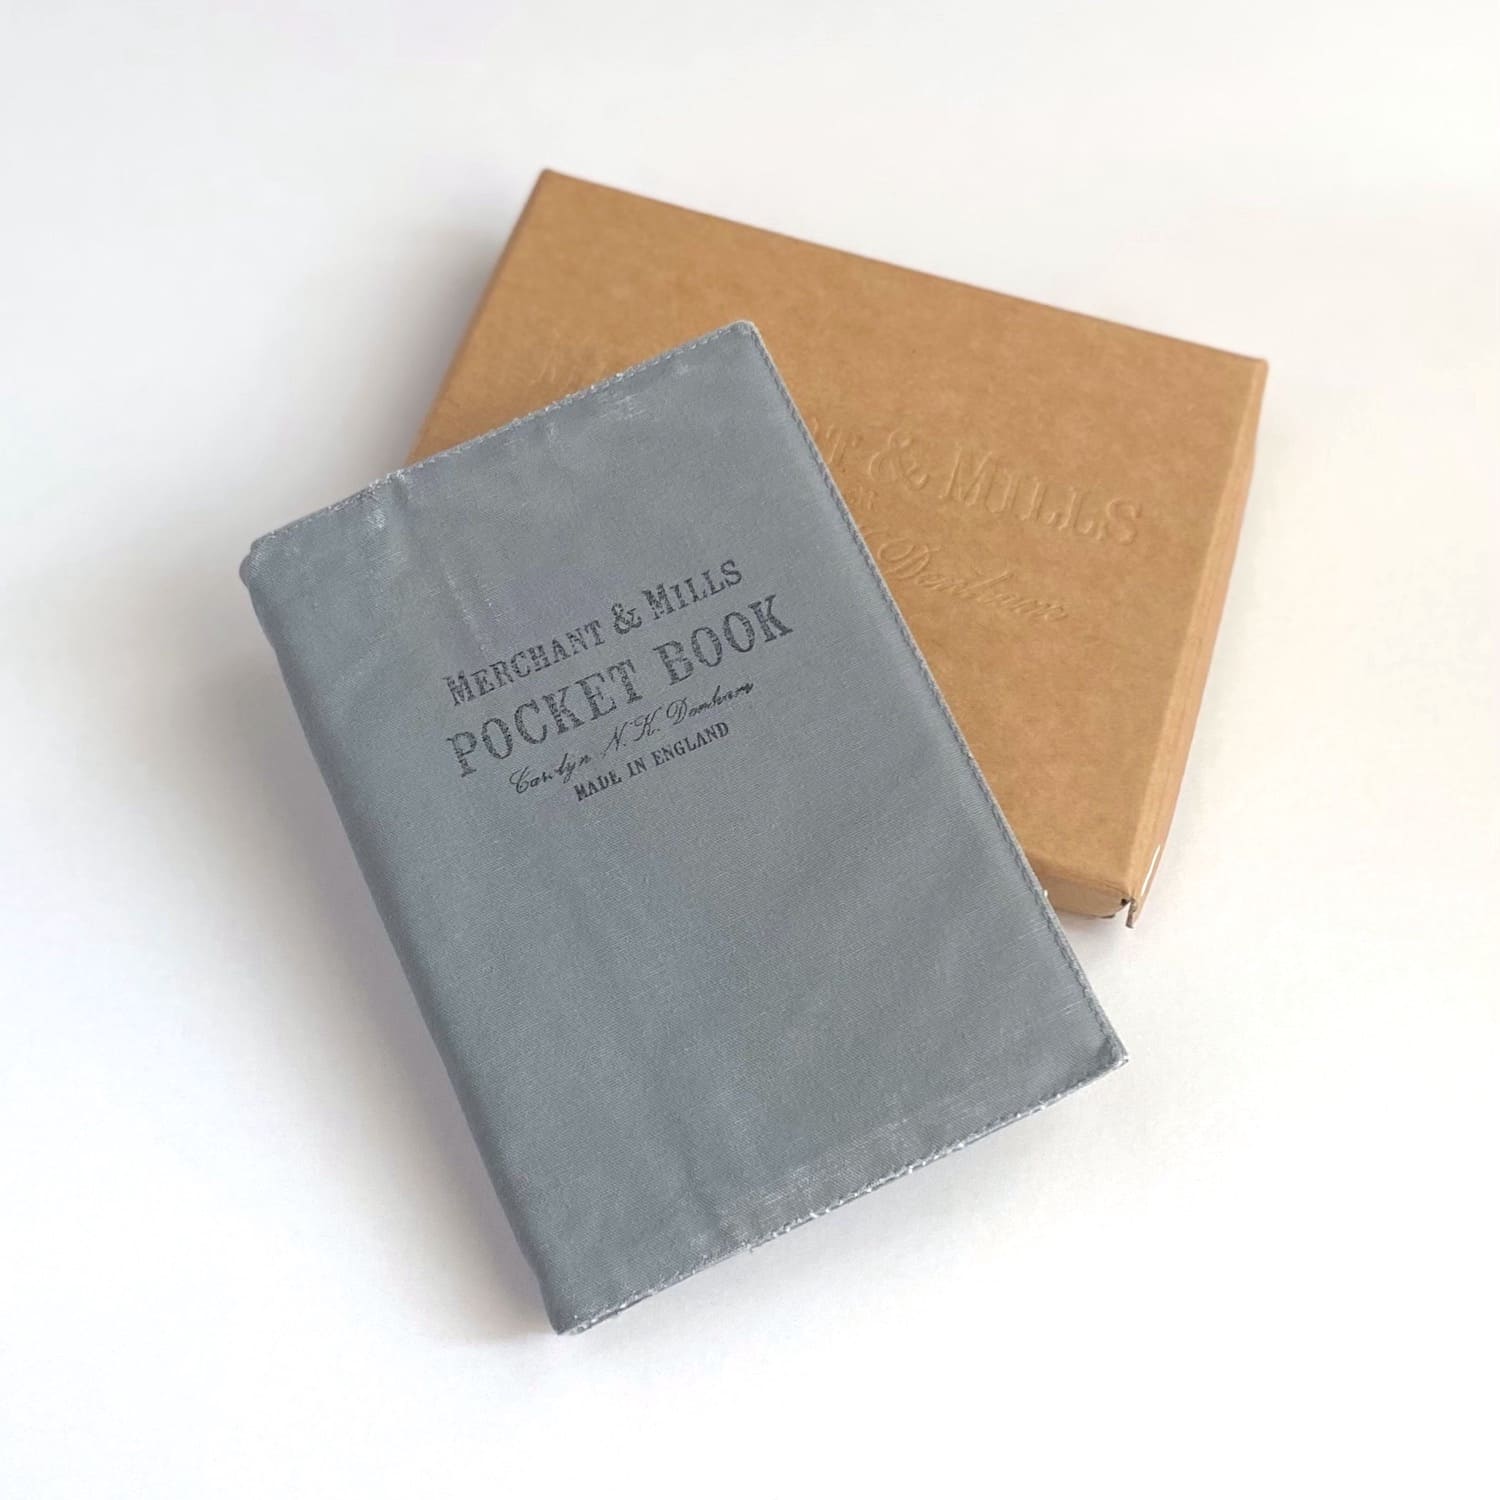 Duck Canvas Covered Pocket Book - Grey